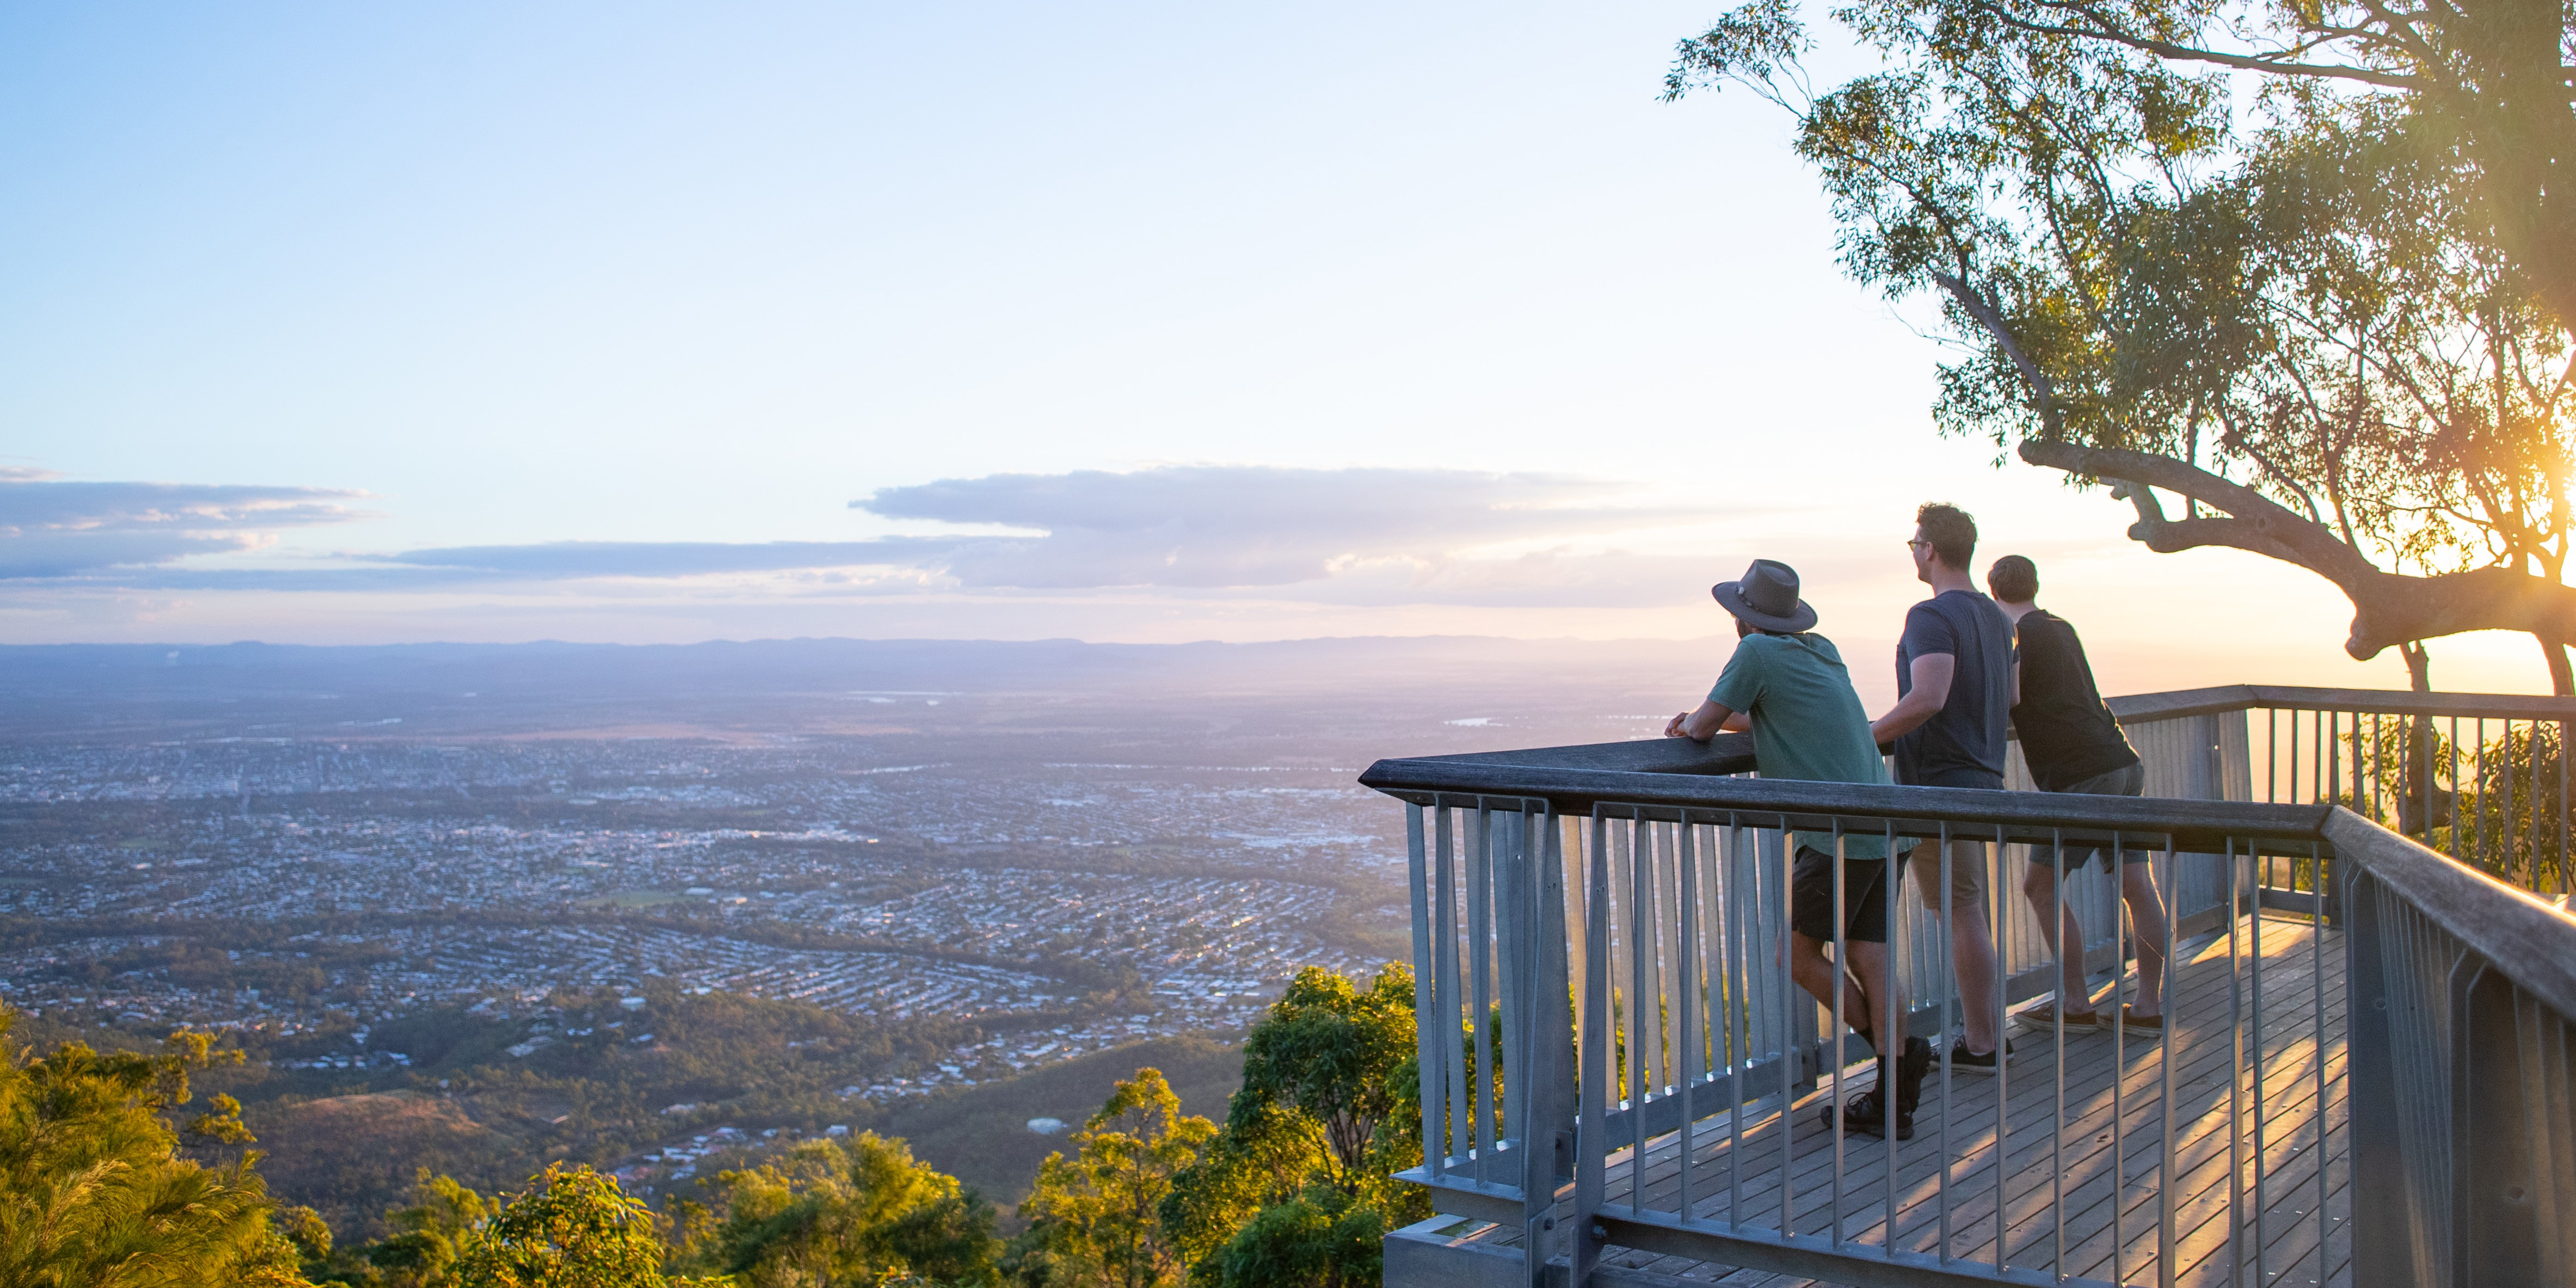 People standing on the treetop boardwalk overlooking Rockhampton from the mountains